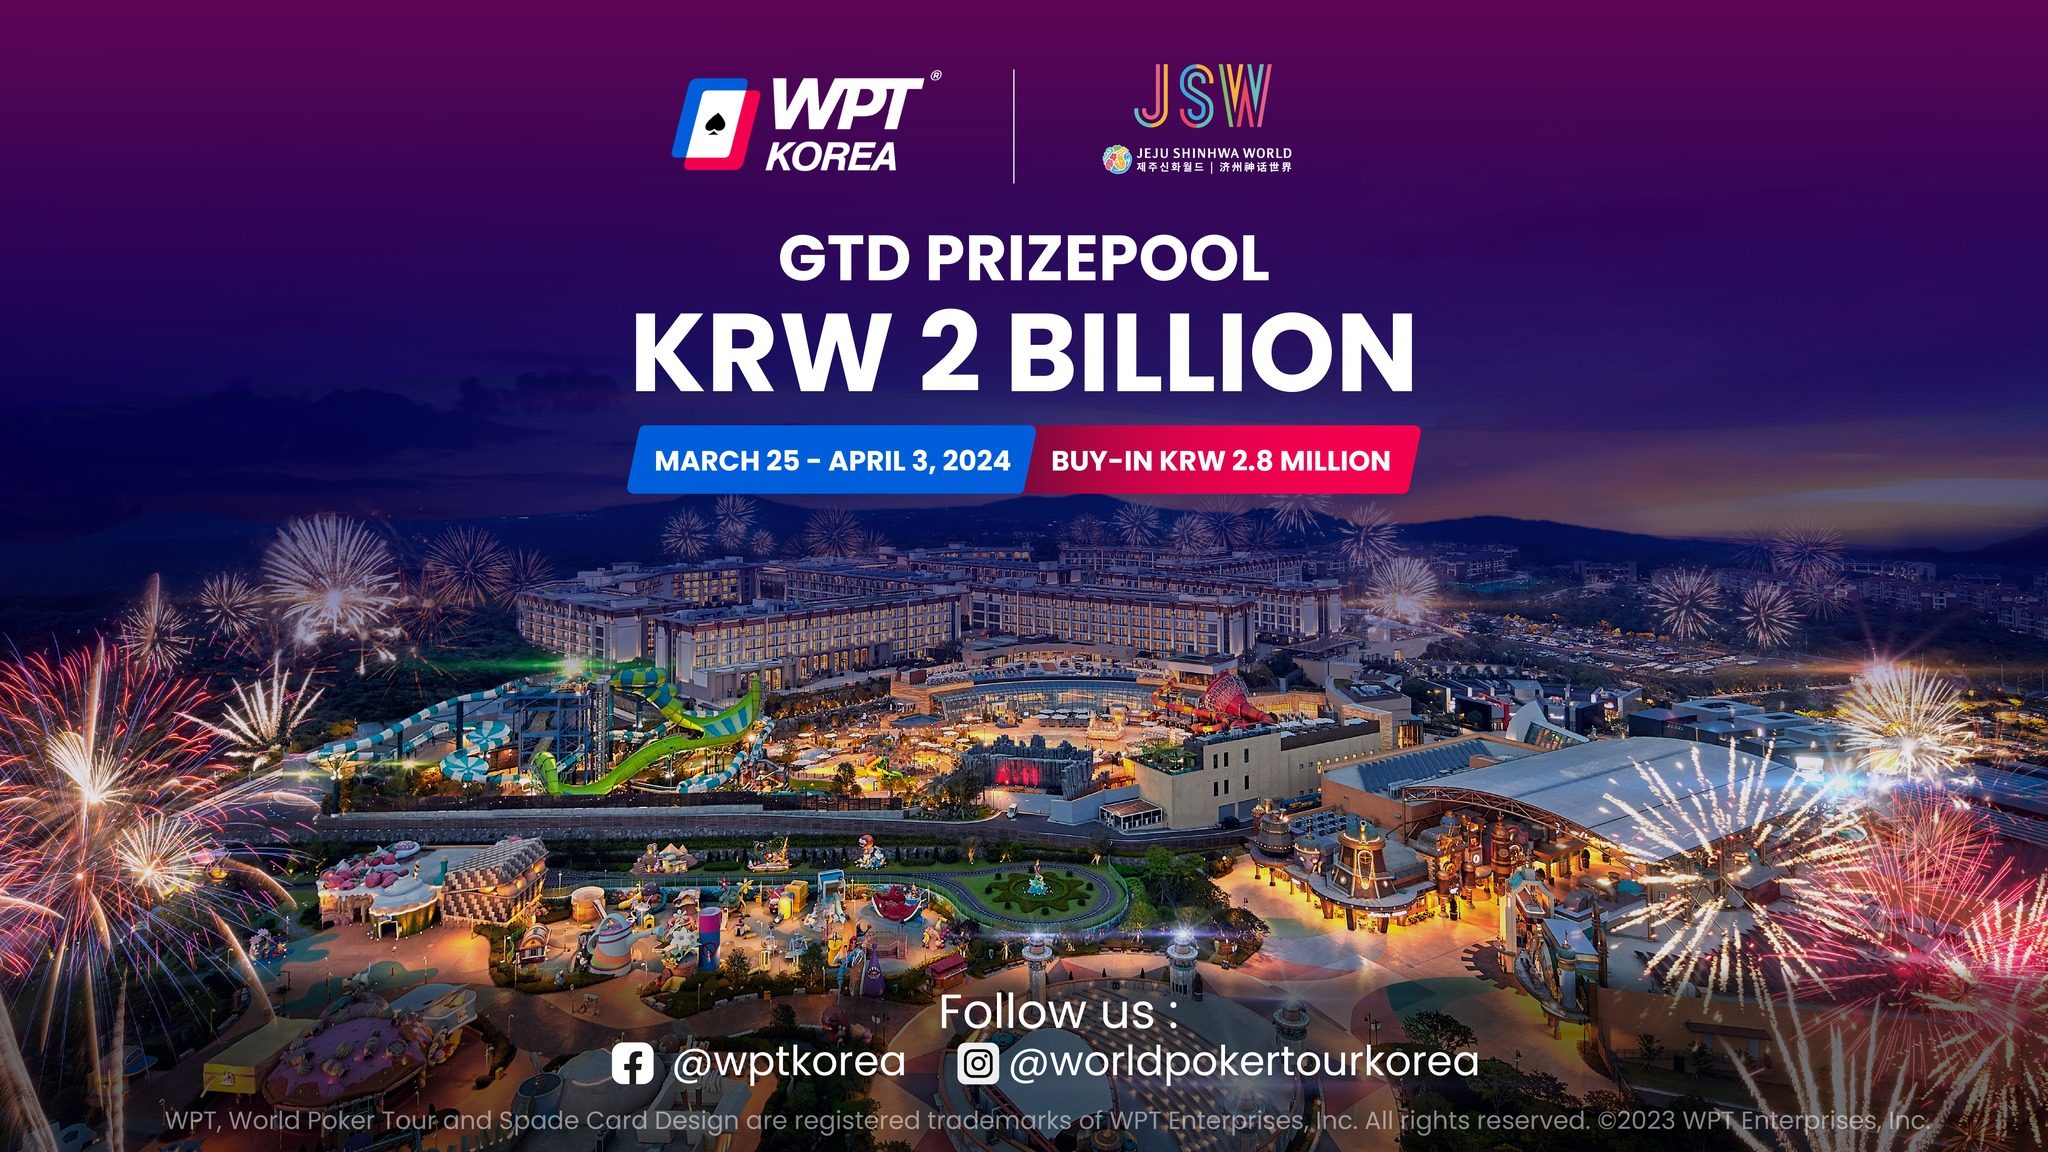 One month away before WPT Korea hits the felt; First WPT Ring in Asia at stake